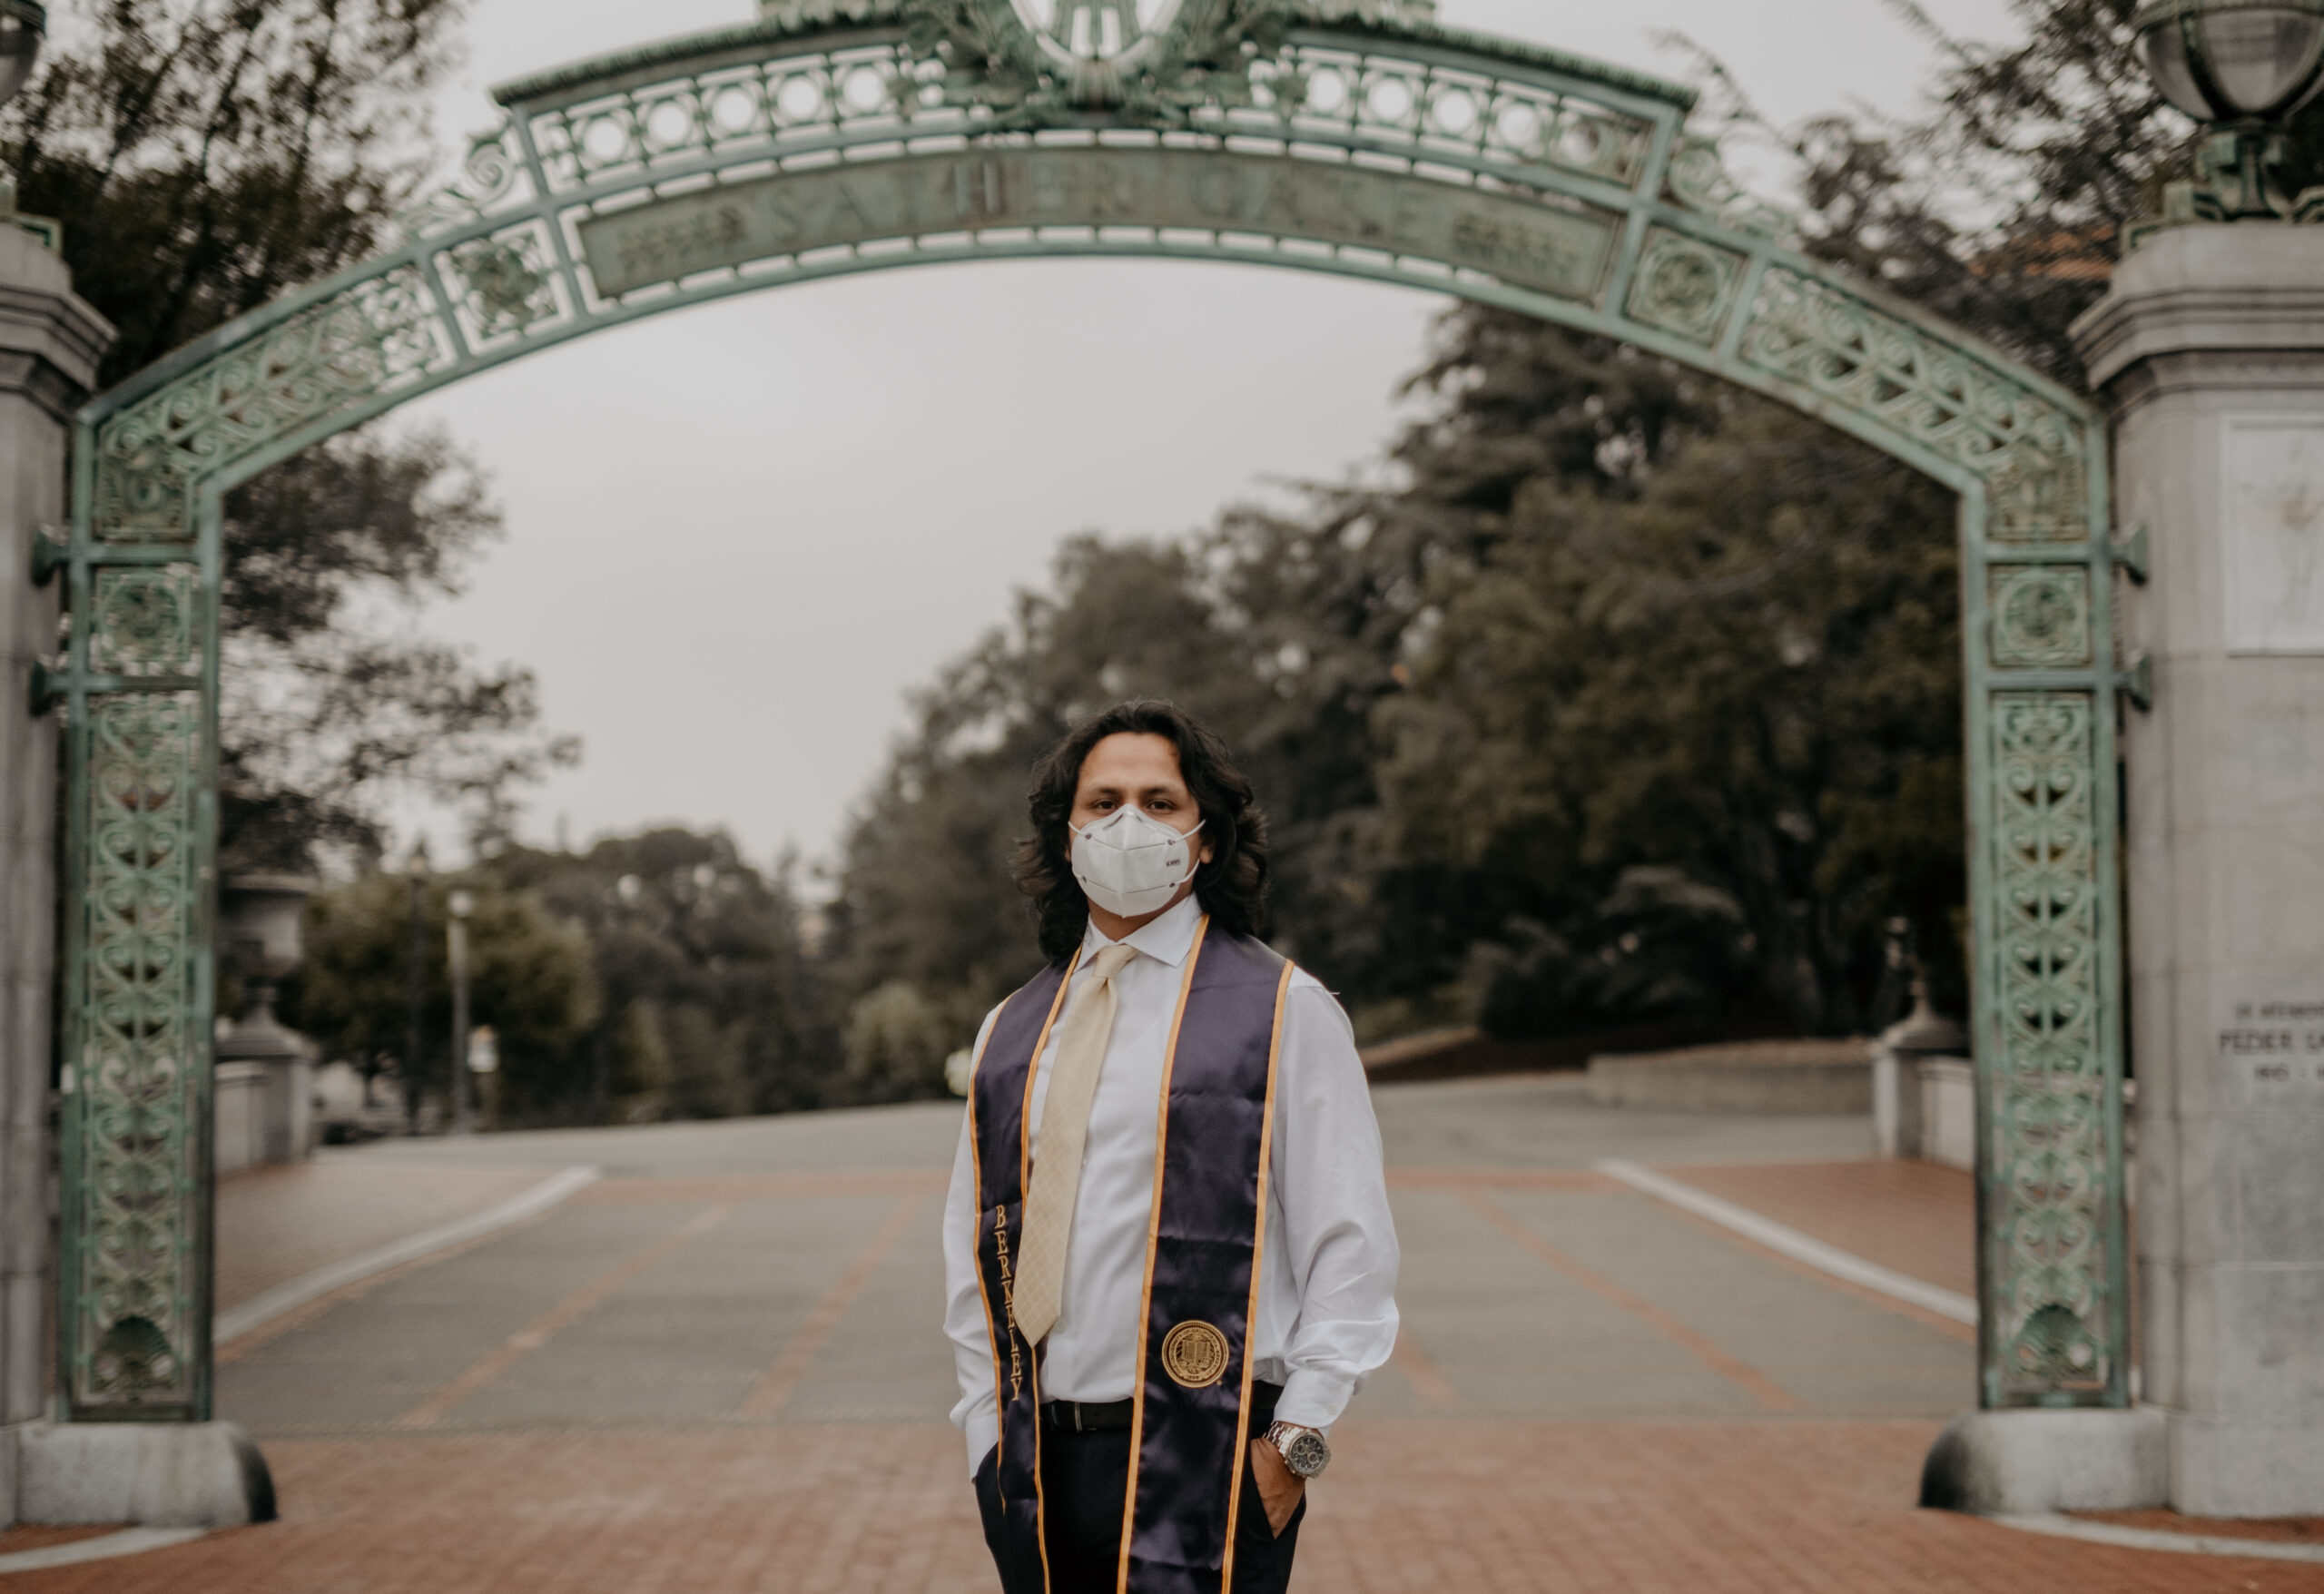 Luis posing in front of Sather Gate with a white mask, berkeley stole, and white collared shirt with black dress pants with his hands in his pockets.